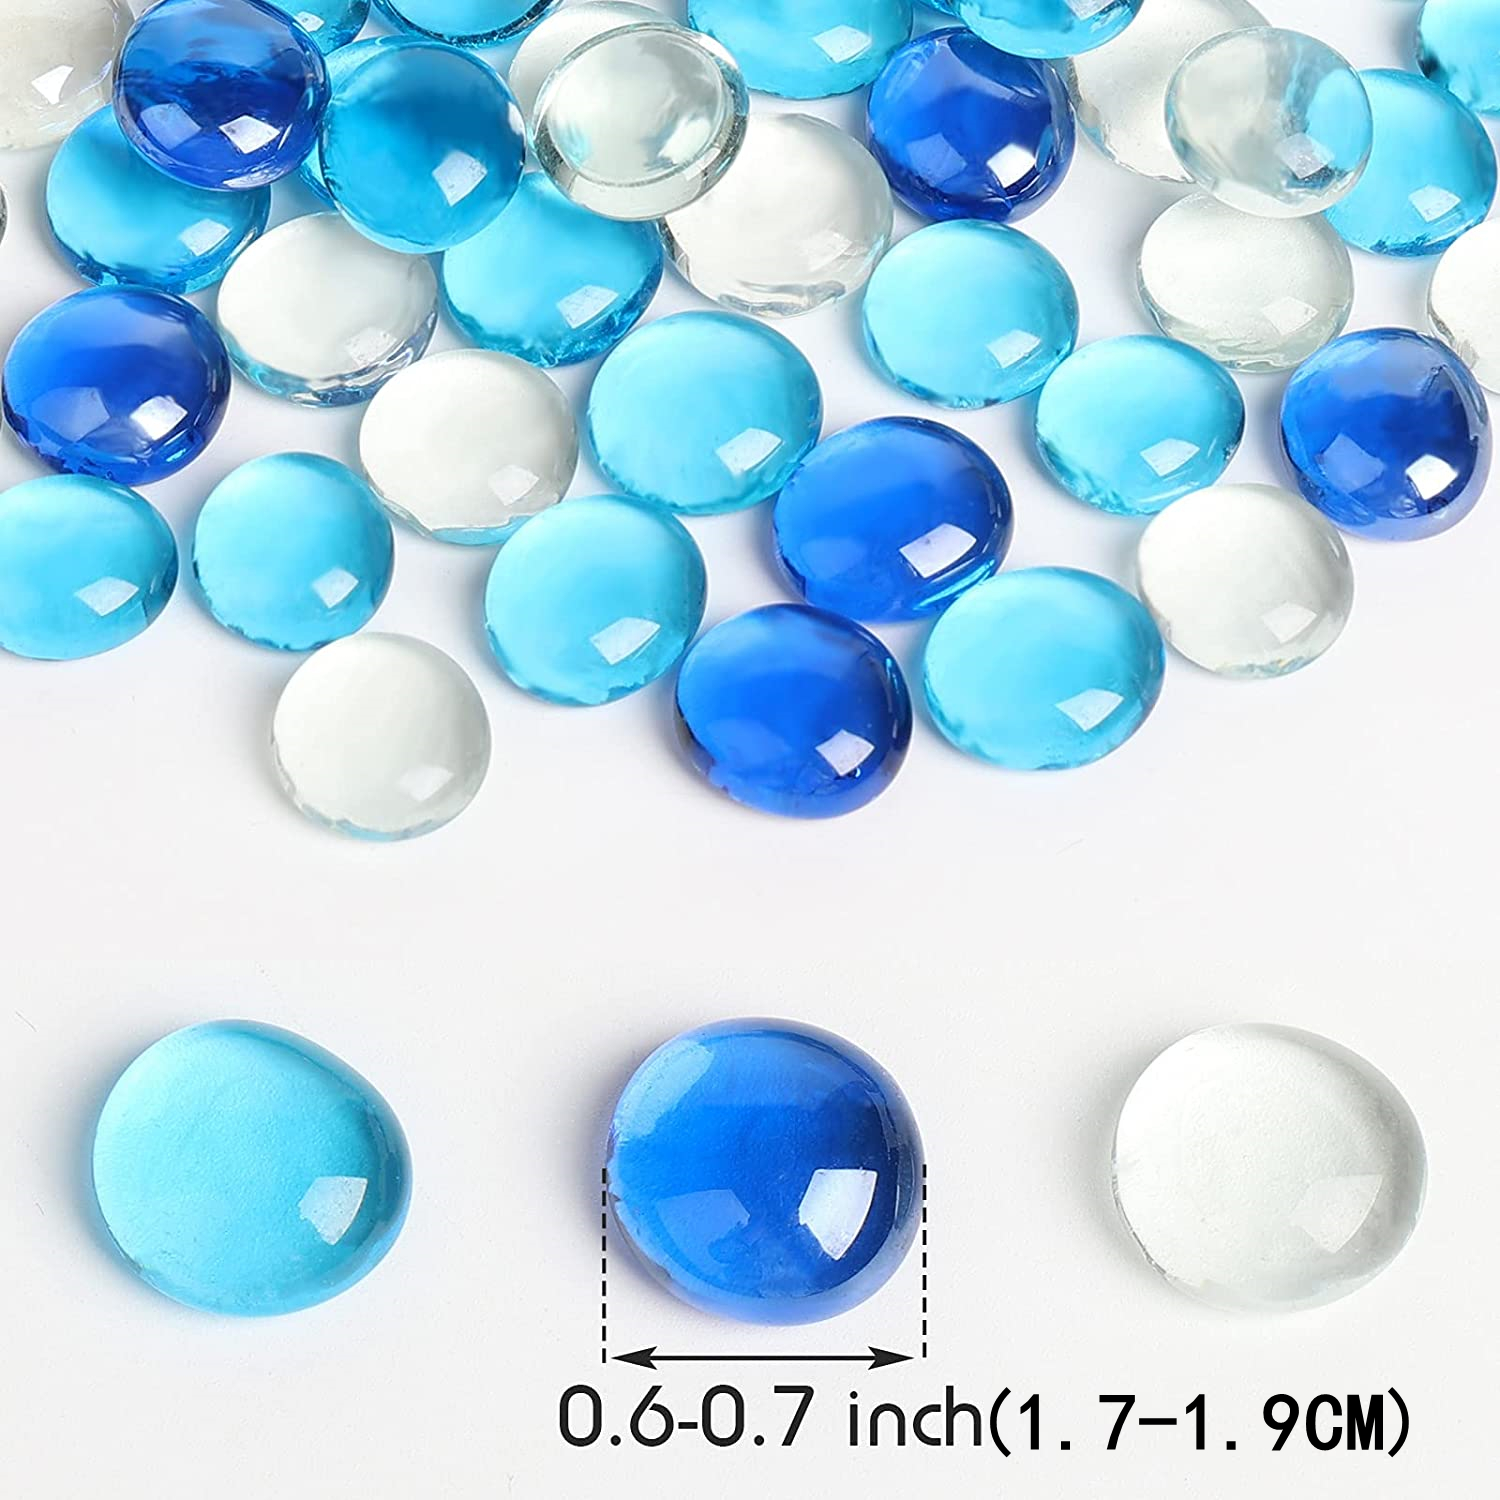 Flat Clear Marbles (5 Pound Bag)